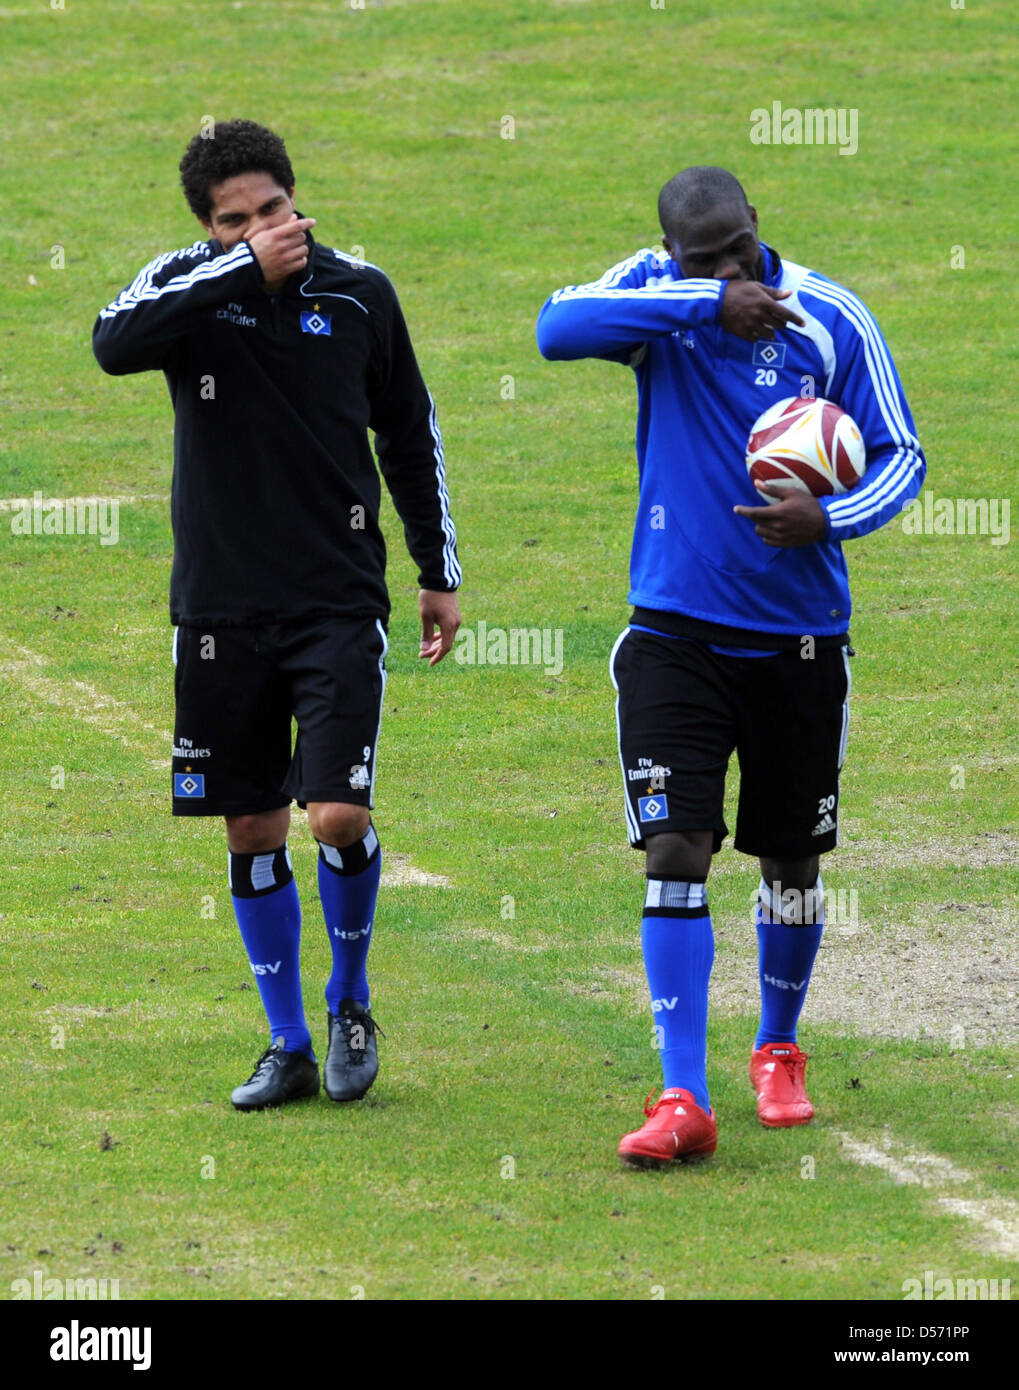 Hamburg's José Paolo Guerrero (L) and Guy Demel leave a training session of German Bundesliga soccer club SV Hamburg in Hamburg, Germany, 06 April 2010. After the goalless draw in the Bundesliga match against Hanover 96 on 04 April 2010, Guerrero threw a drinking bottle in a fan's face who had provoked him before. Guerrero could be suspended by the German Football Association DFB.  Stock Photo